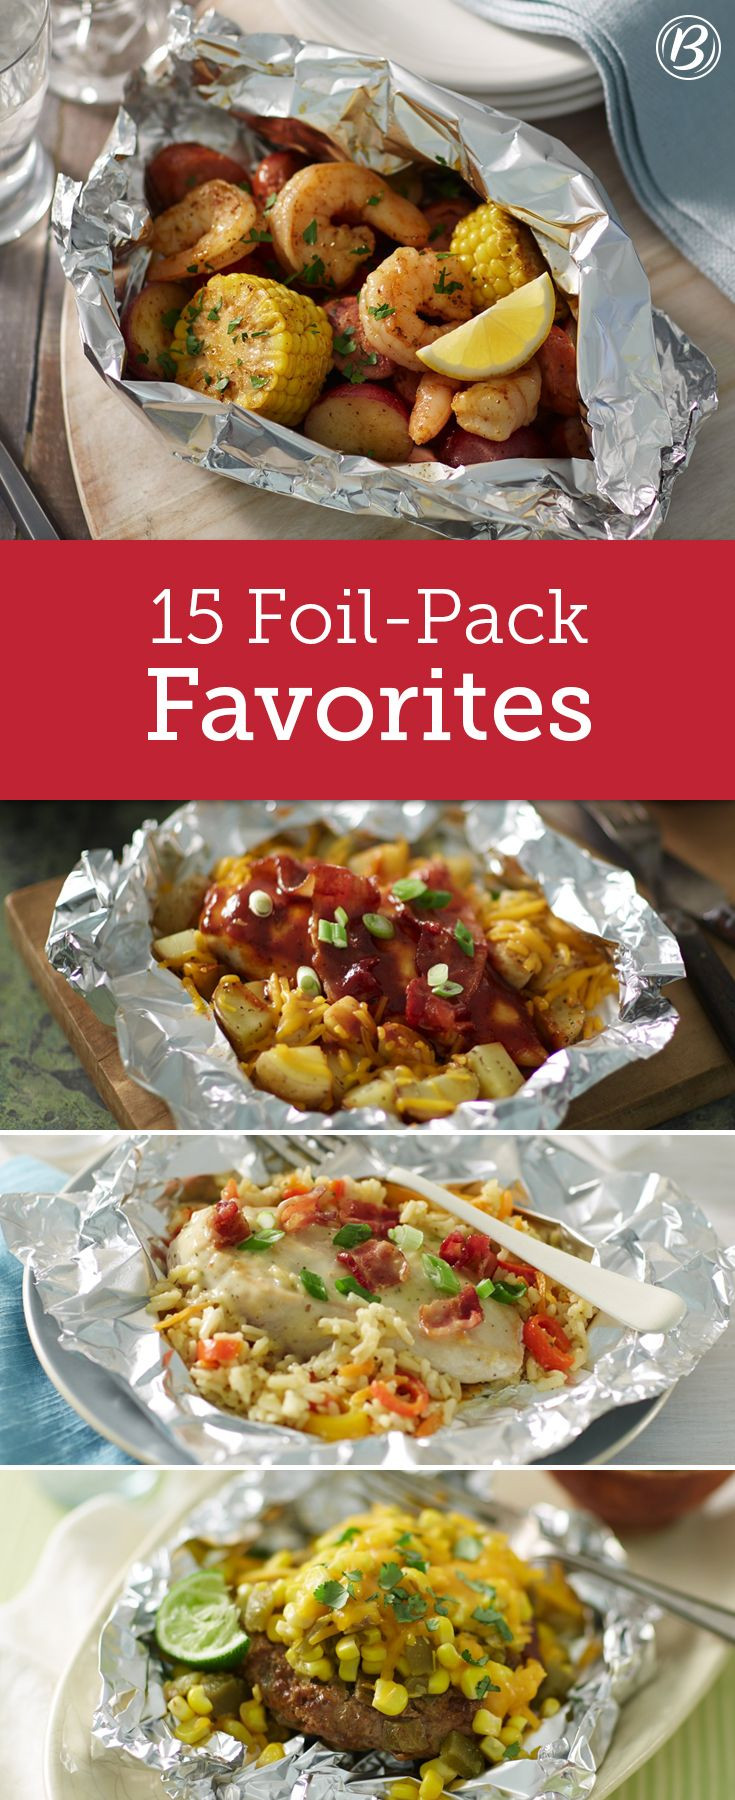 Foil Packet Dinners Camping
 17 Best images about Foil Pack Recipes on Pinterest